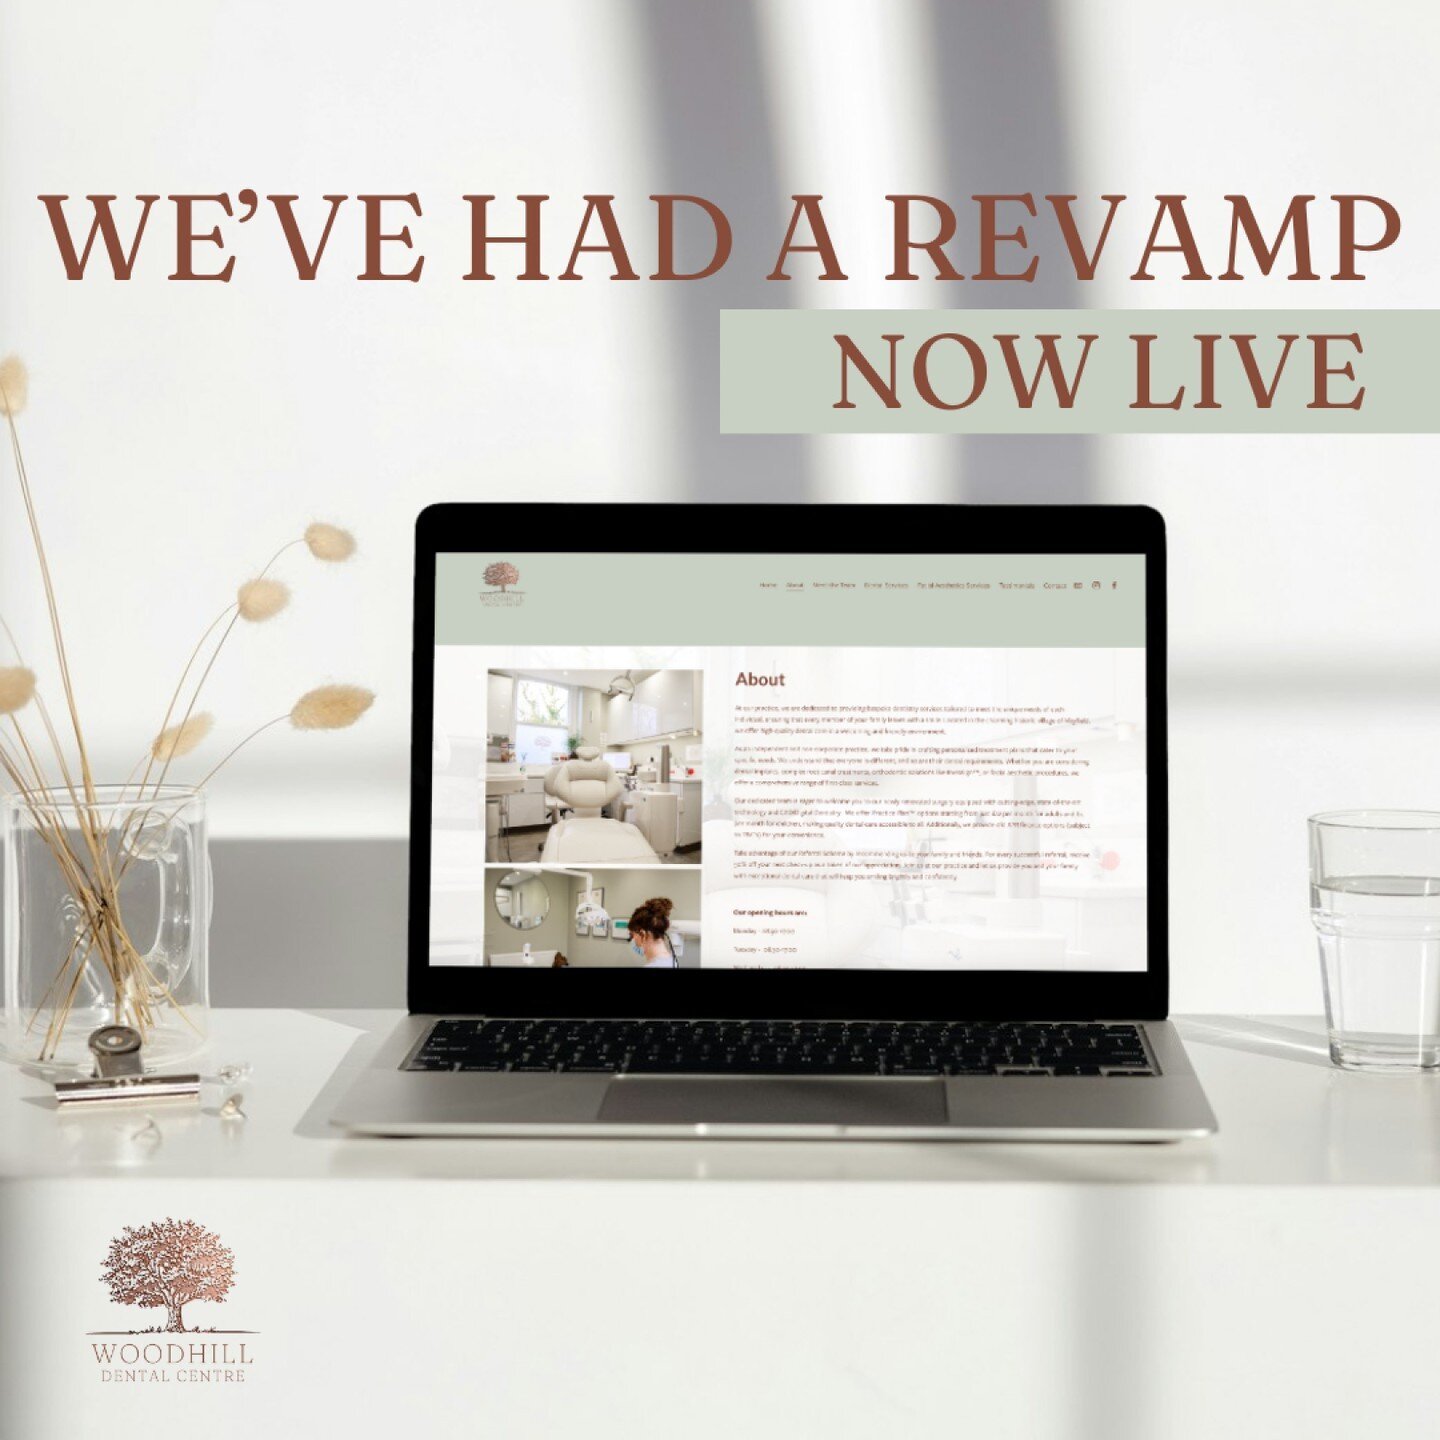 ✨✨ WE&rsquo;VE HAD A REVAMP ✨✨

We are thrilled to announce that we have recently undergone a revamp of our website and it is now LIVE!!

We are excited to invite you to visit our website at www.woodhilldental.co.uk 💚

Discover our high-quality priv